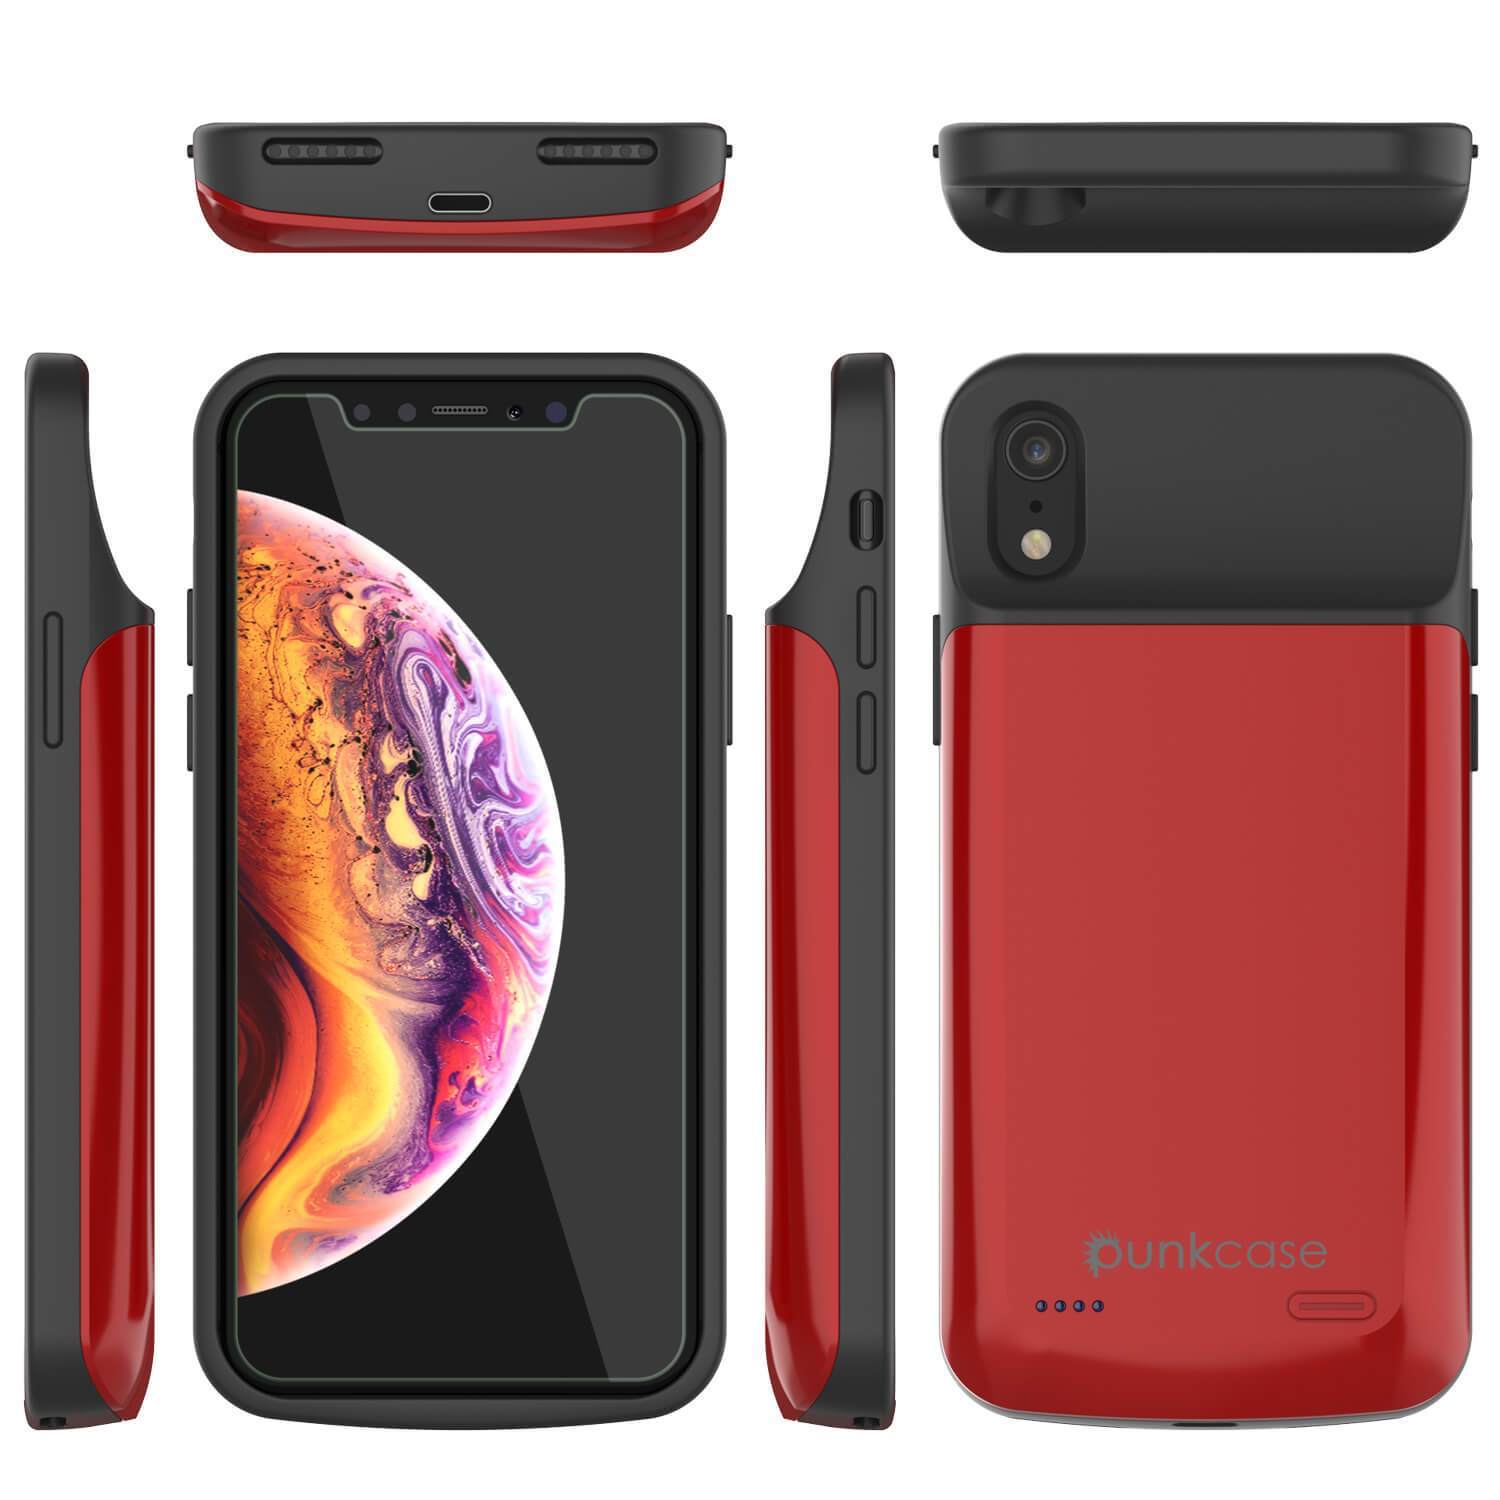 iPhone 11 Pro Max Battery Case, PunkJuice 5000mAH Fast Charging Power Bank W/ Screen Protector | [Red]